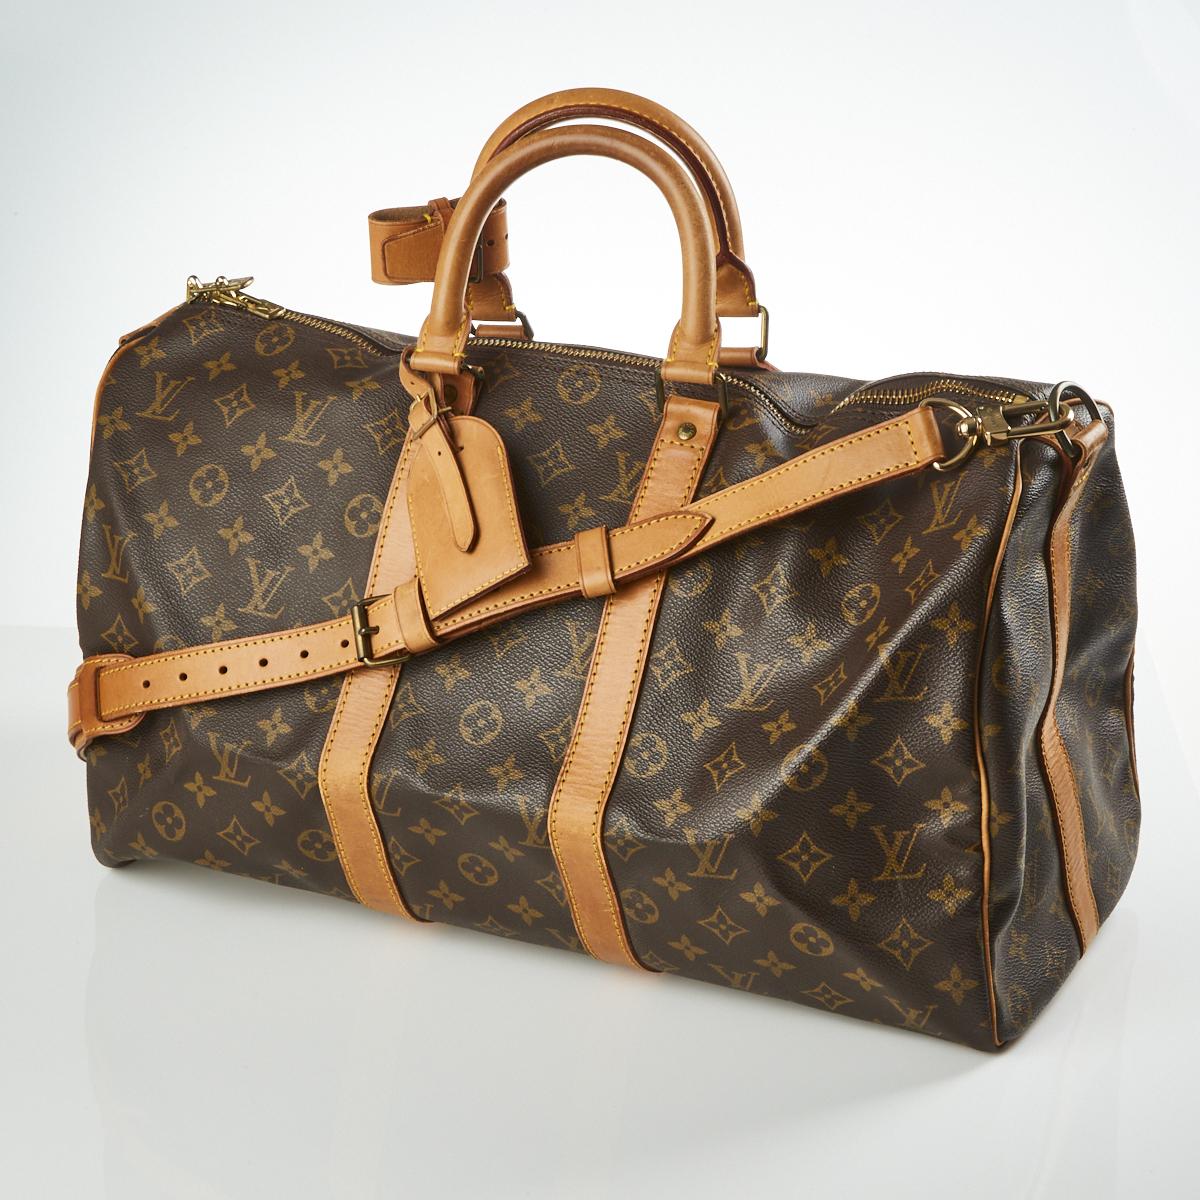 Sold at Auction: LOUIS VUITTON, A KEEPALL BANDOULIERE 45 TRAVEL BAG